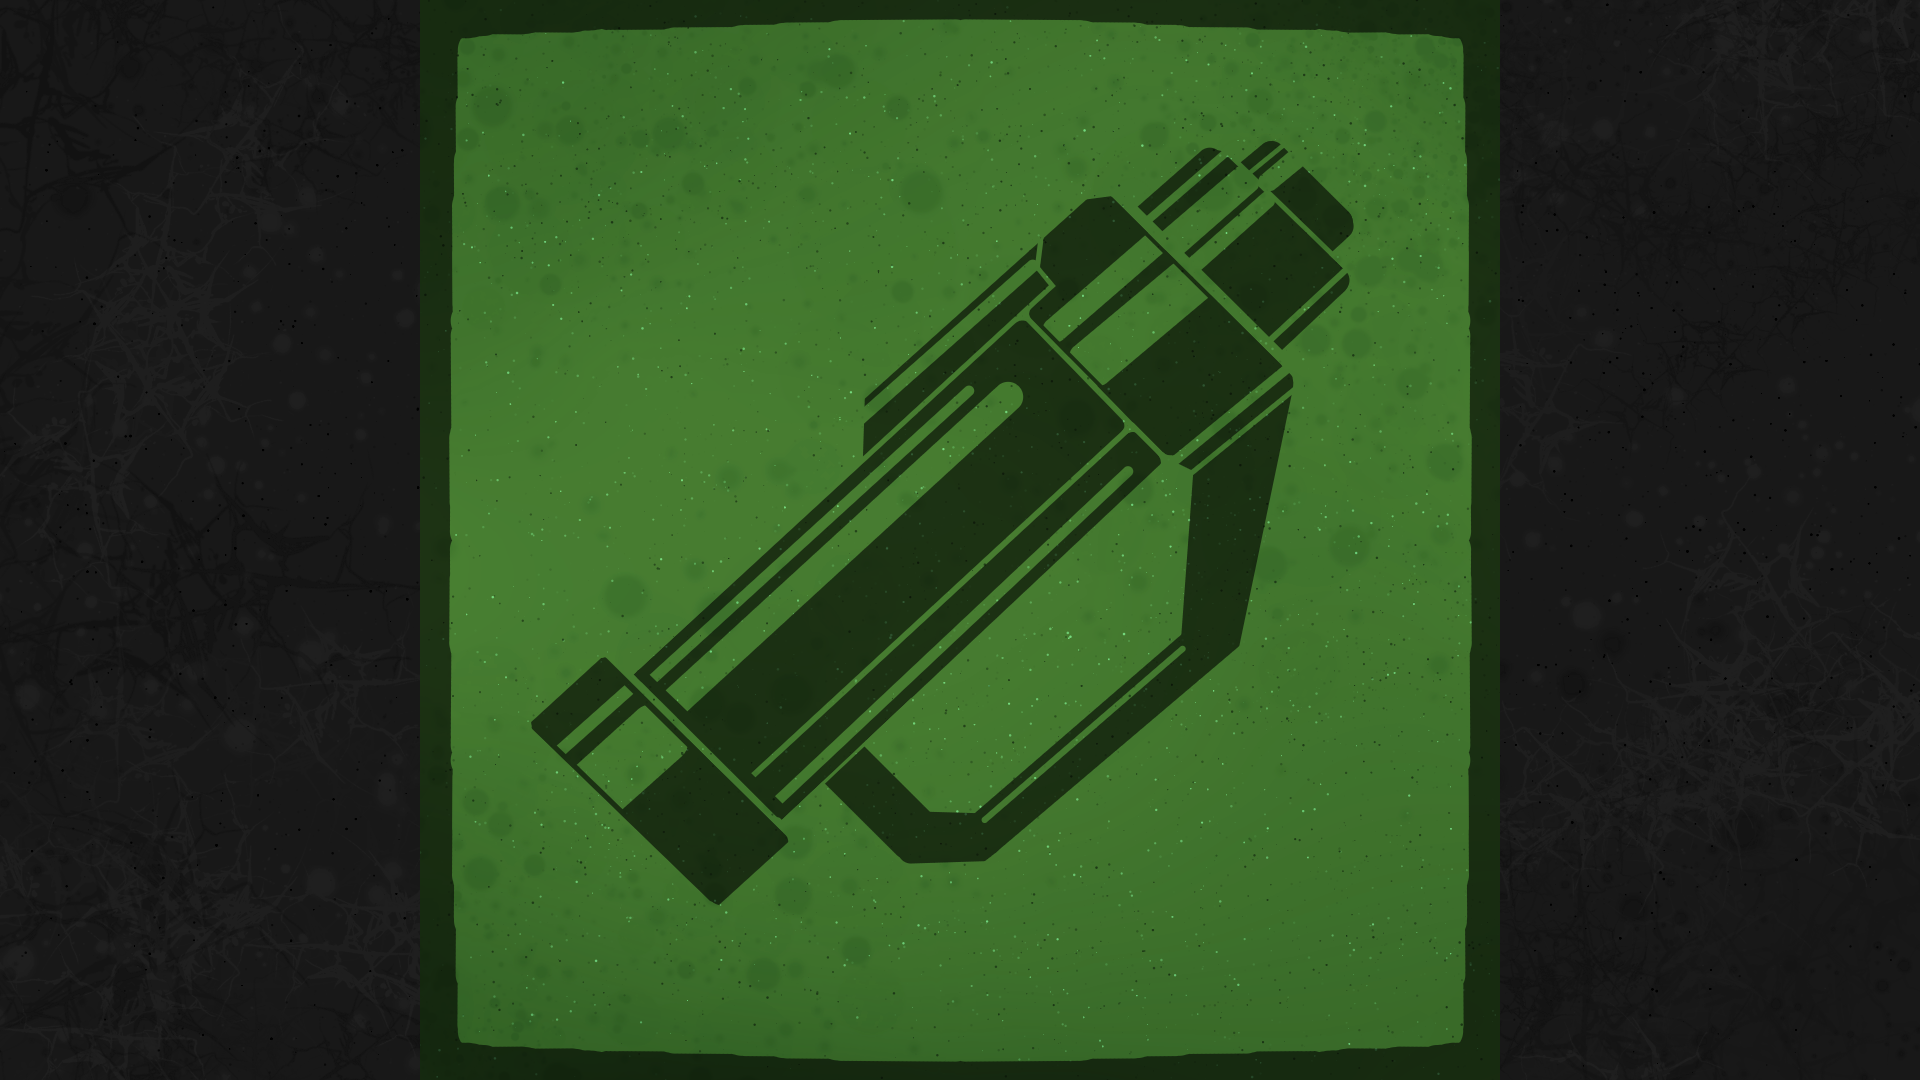 Icon for RPG